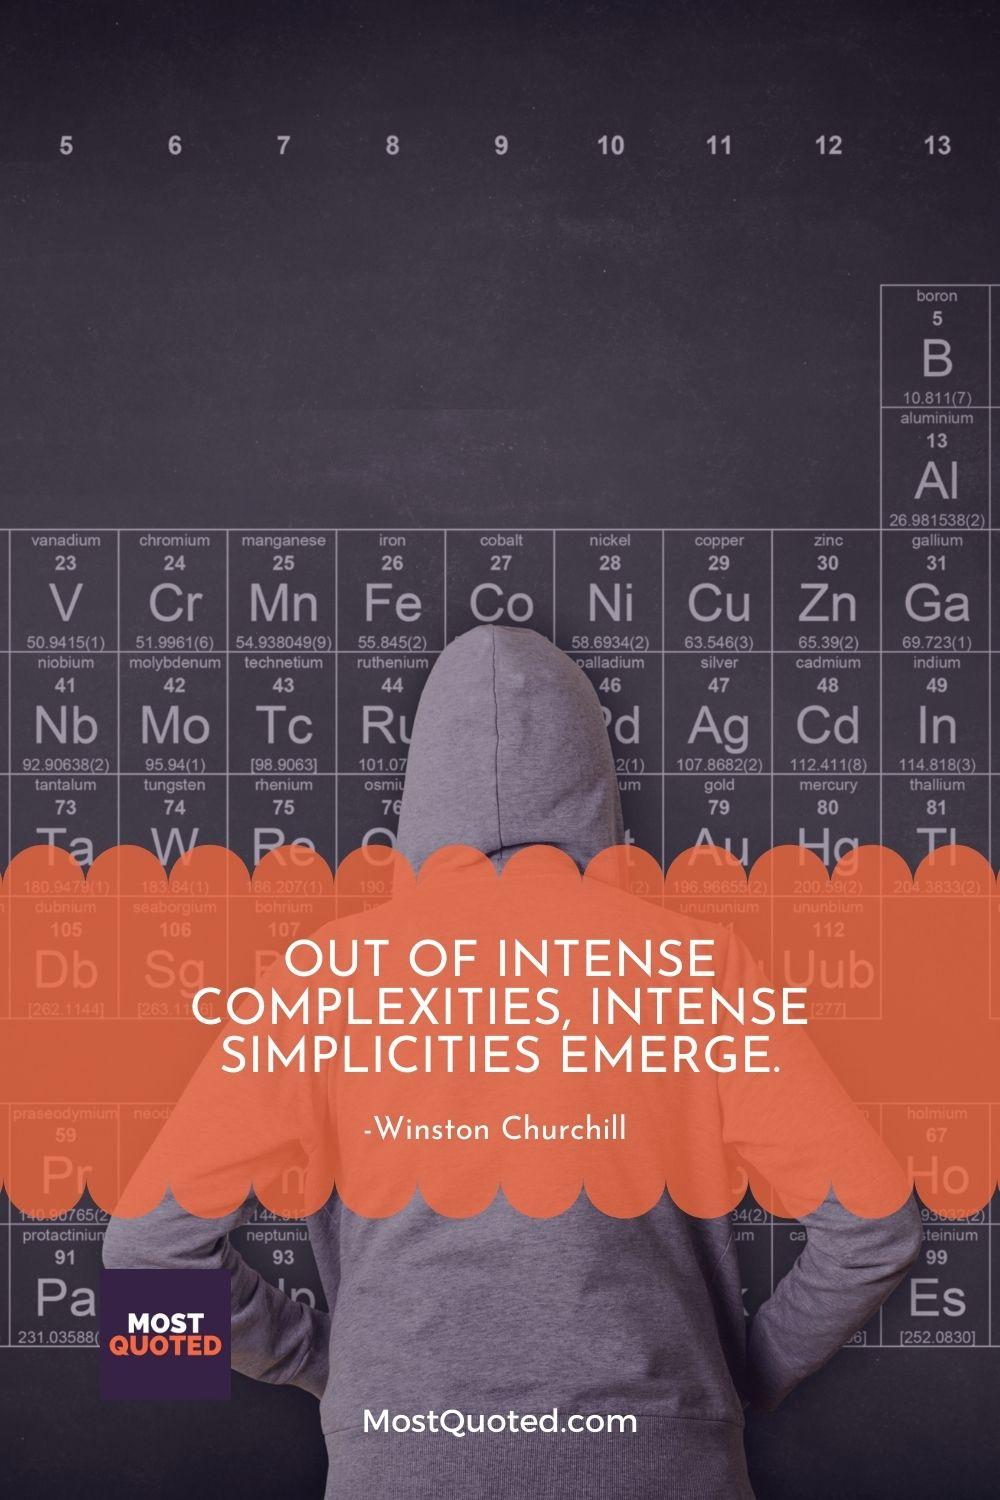 Out of intense complexities, intense simplicities emerge. - Winston Churchill